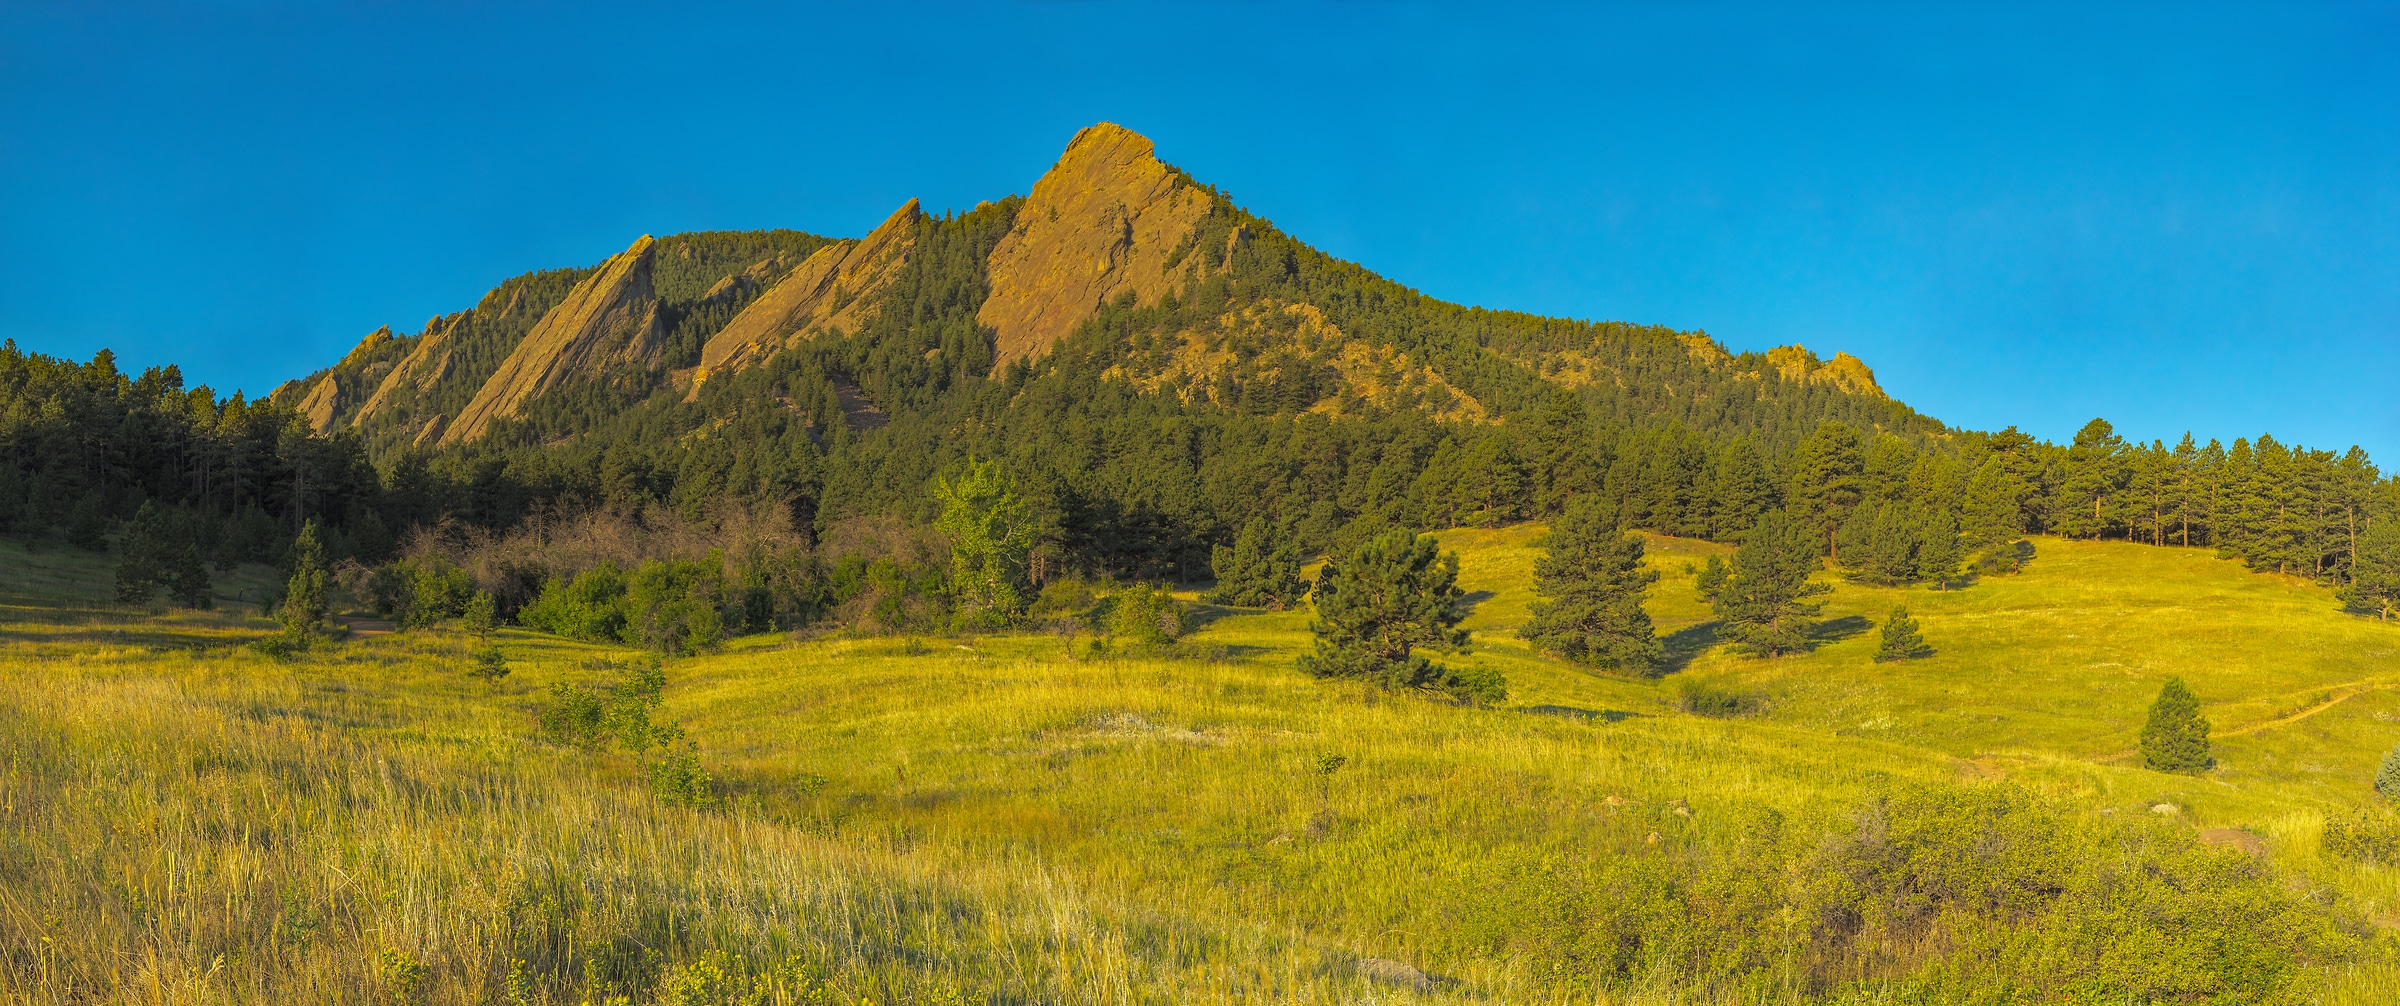 3,454 megapixels! A very high resolution, large-format VAST photo print of mountains and rock formations behind a field; landscape photograph created by John Freeman in Chautauqua Park, Boulder, Colorado.